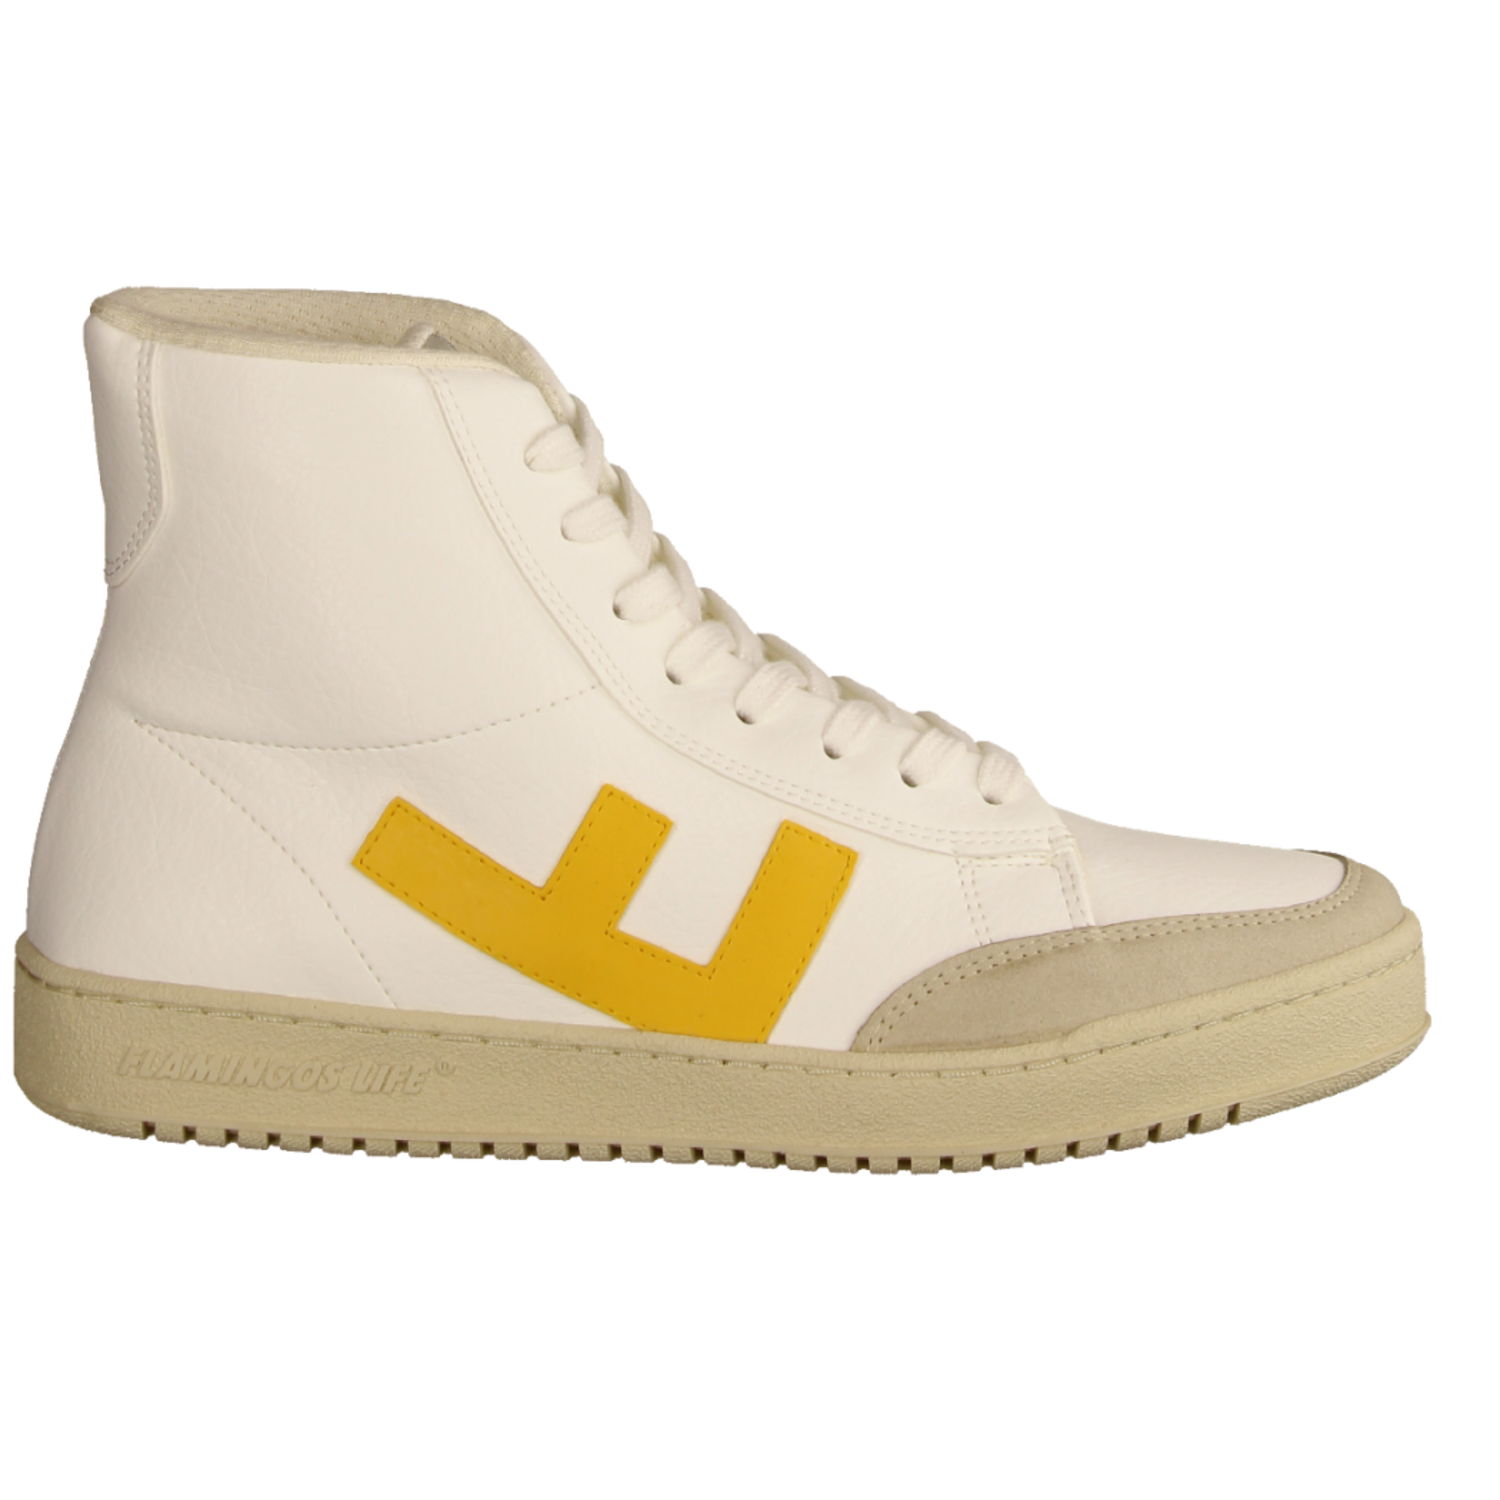 Flamingo\'s Life Old 80s Damen Boots in White Yellow White Yellow (weiß) | Hallenschuhe